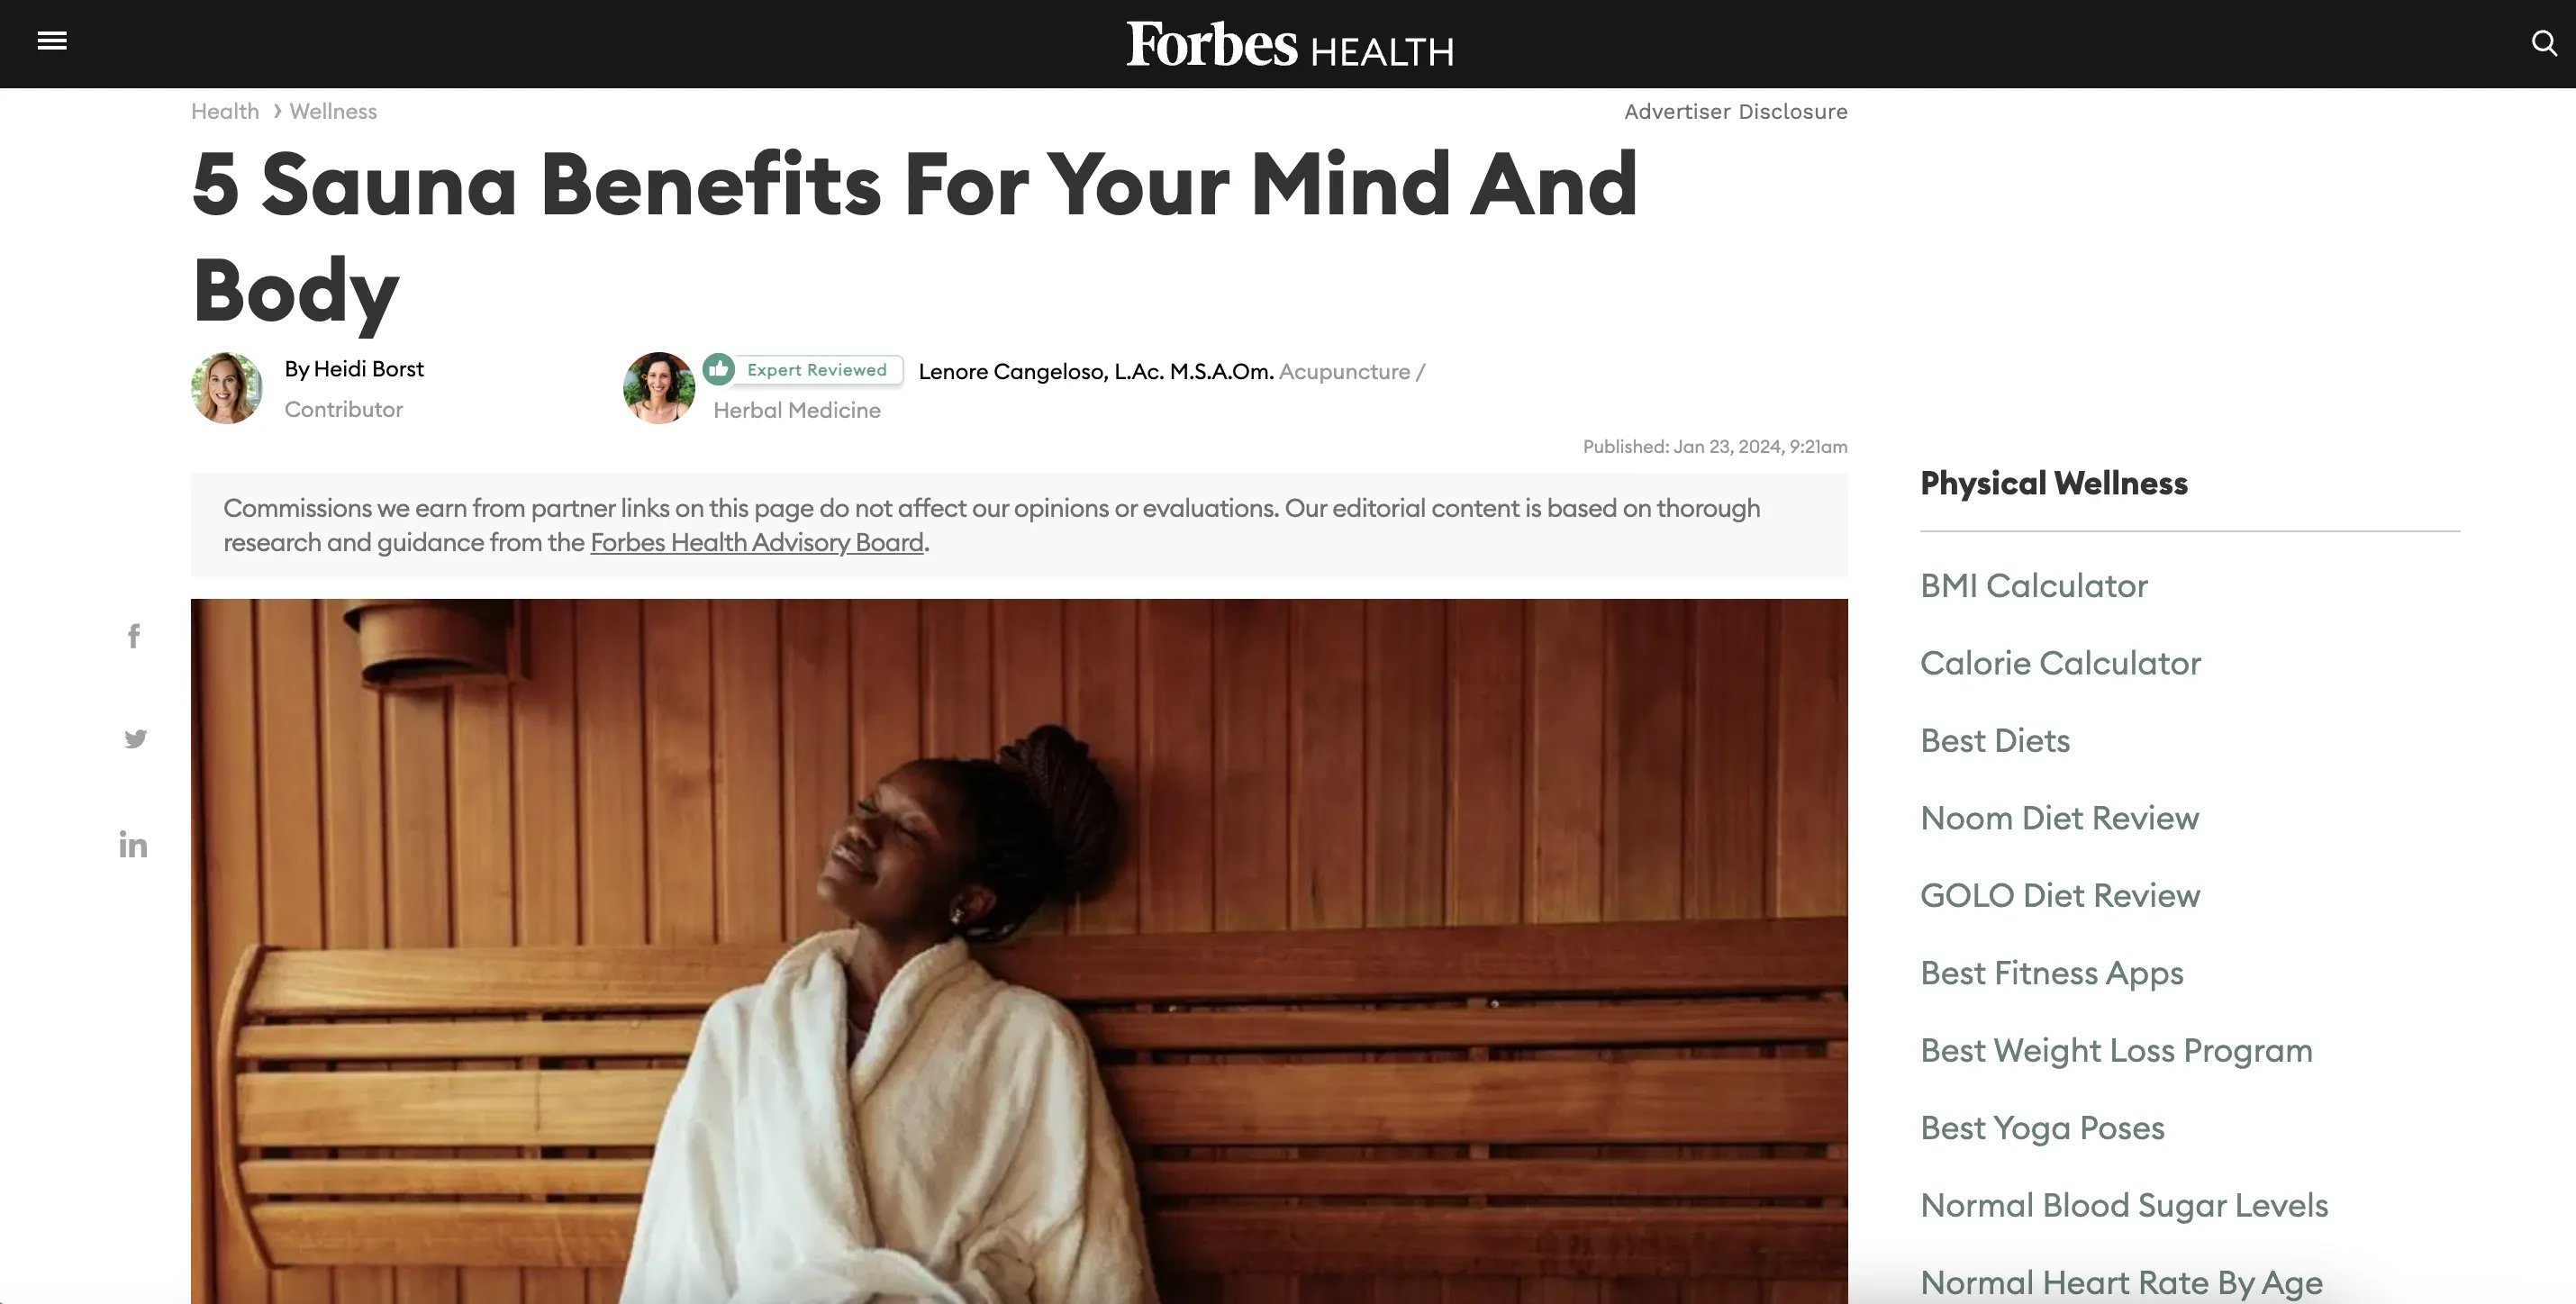 Dr. Reuben Chen Offers Expert Insights in Forbes Health Feature 